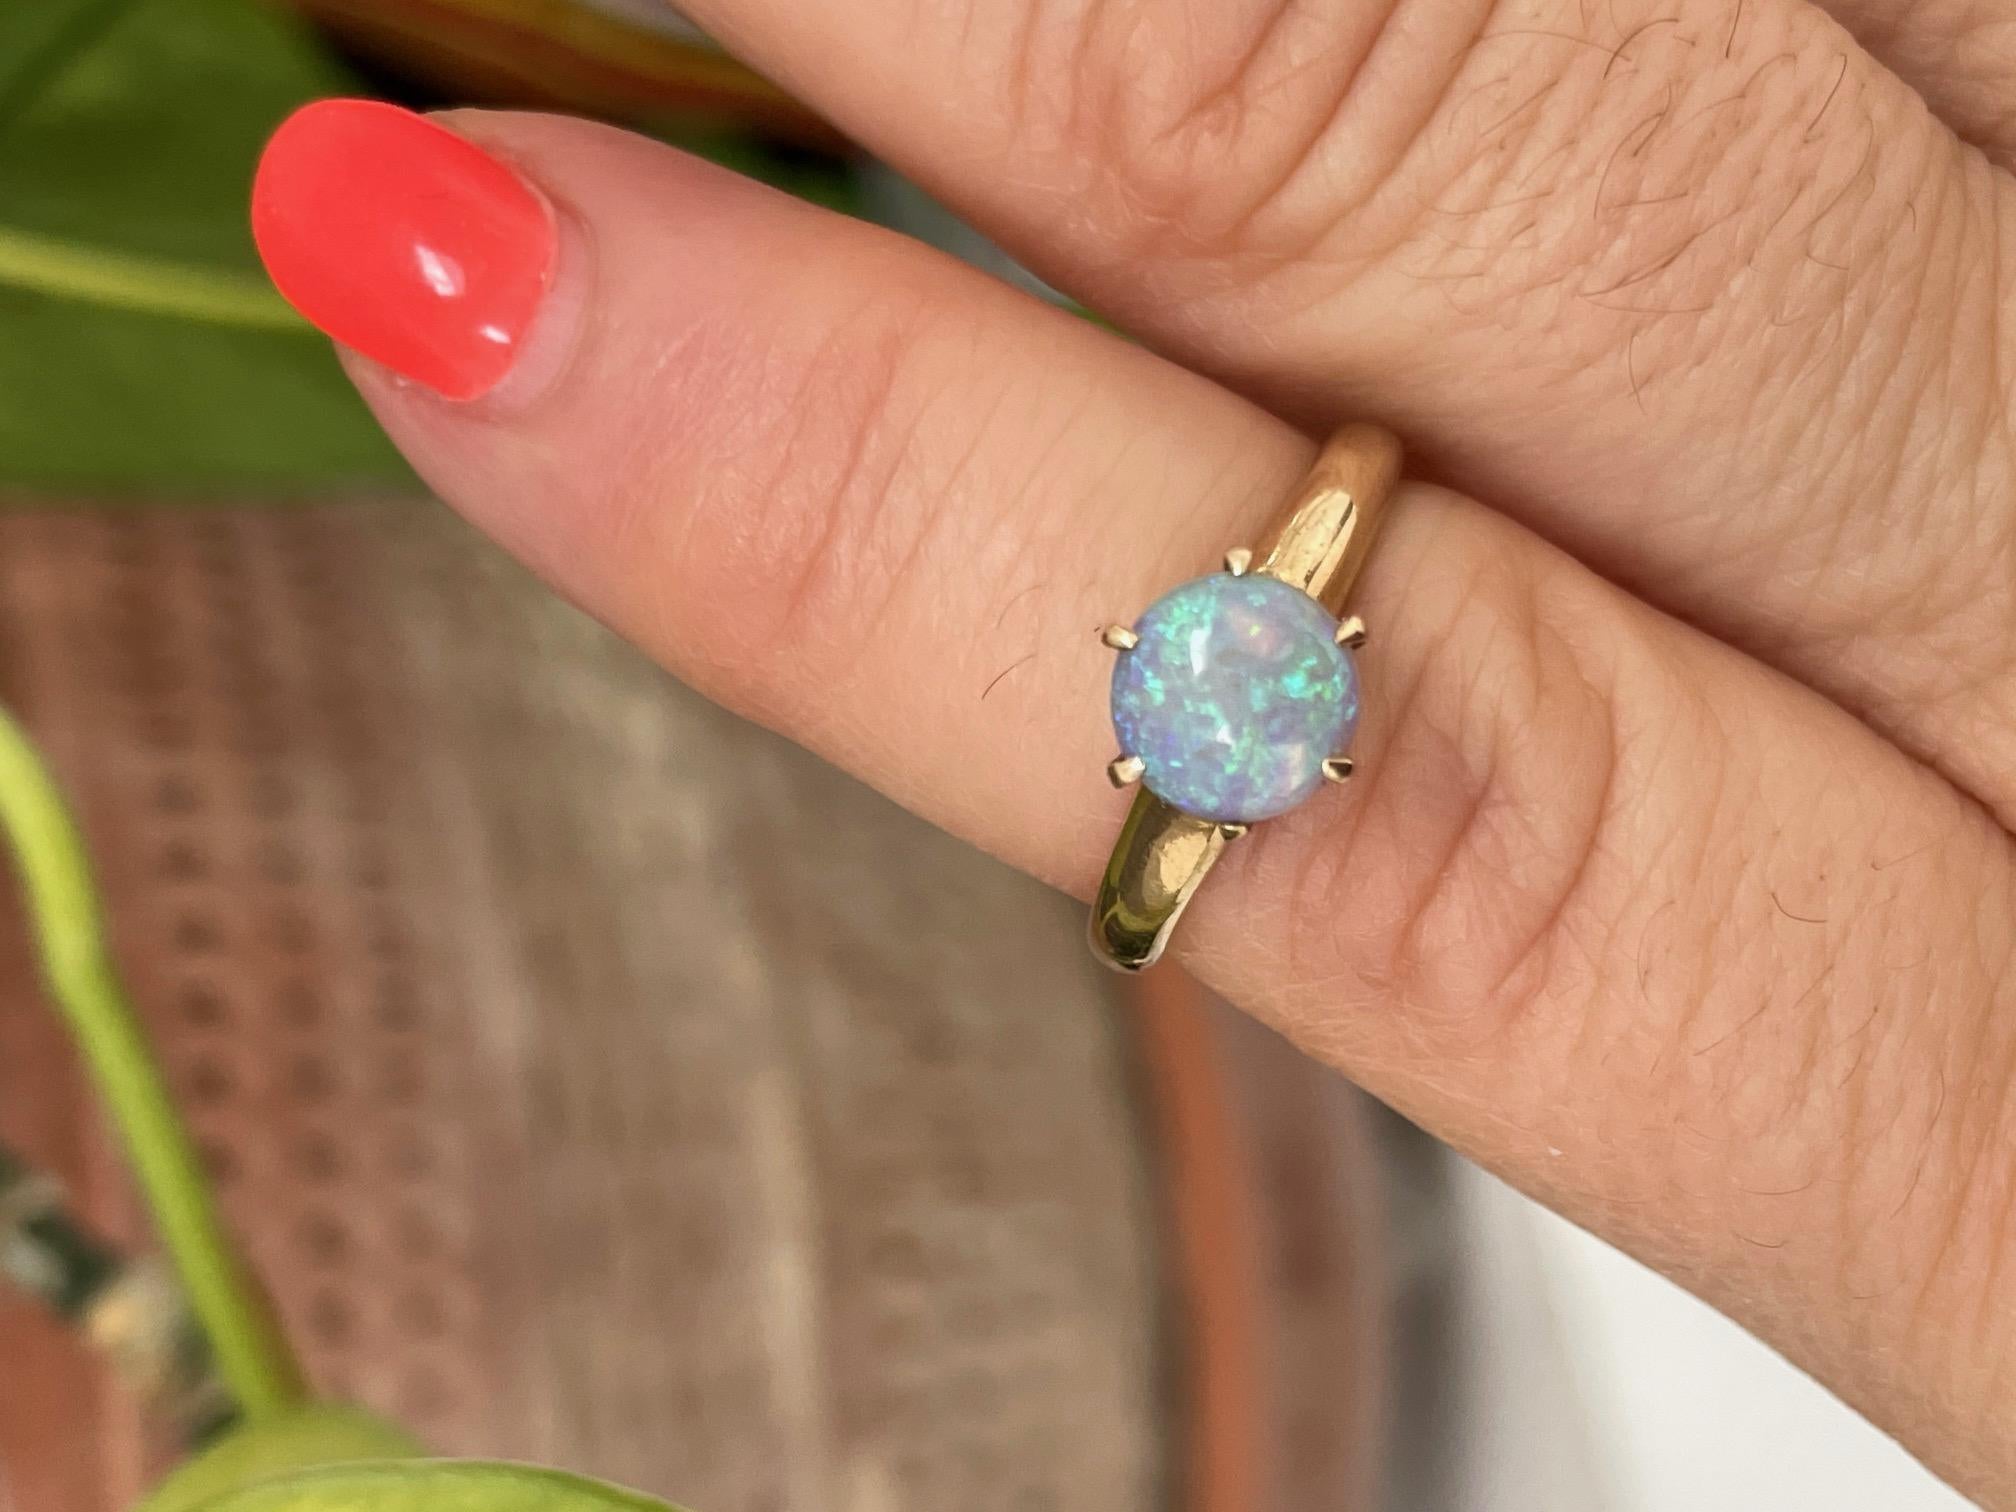 Single solitaire opal set in 14K Gold. Nice color in the opal. The ring is a size 6.5. Measures 6.9mm x 6.9mm. The ring is a 5.25 but can be sized by us or your jeweler. Please check our storefront for hundreds of items including New, Never worn